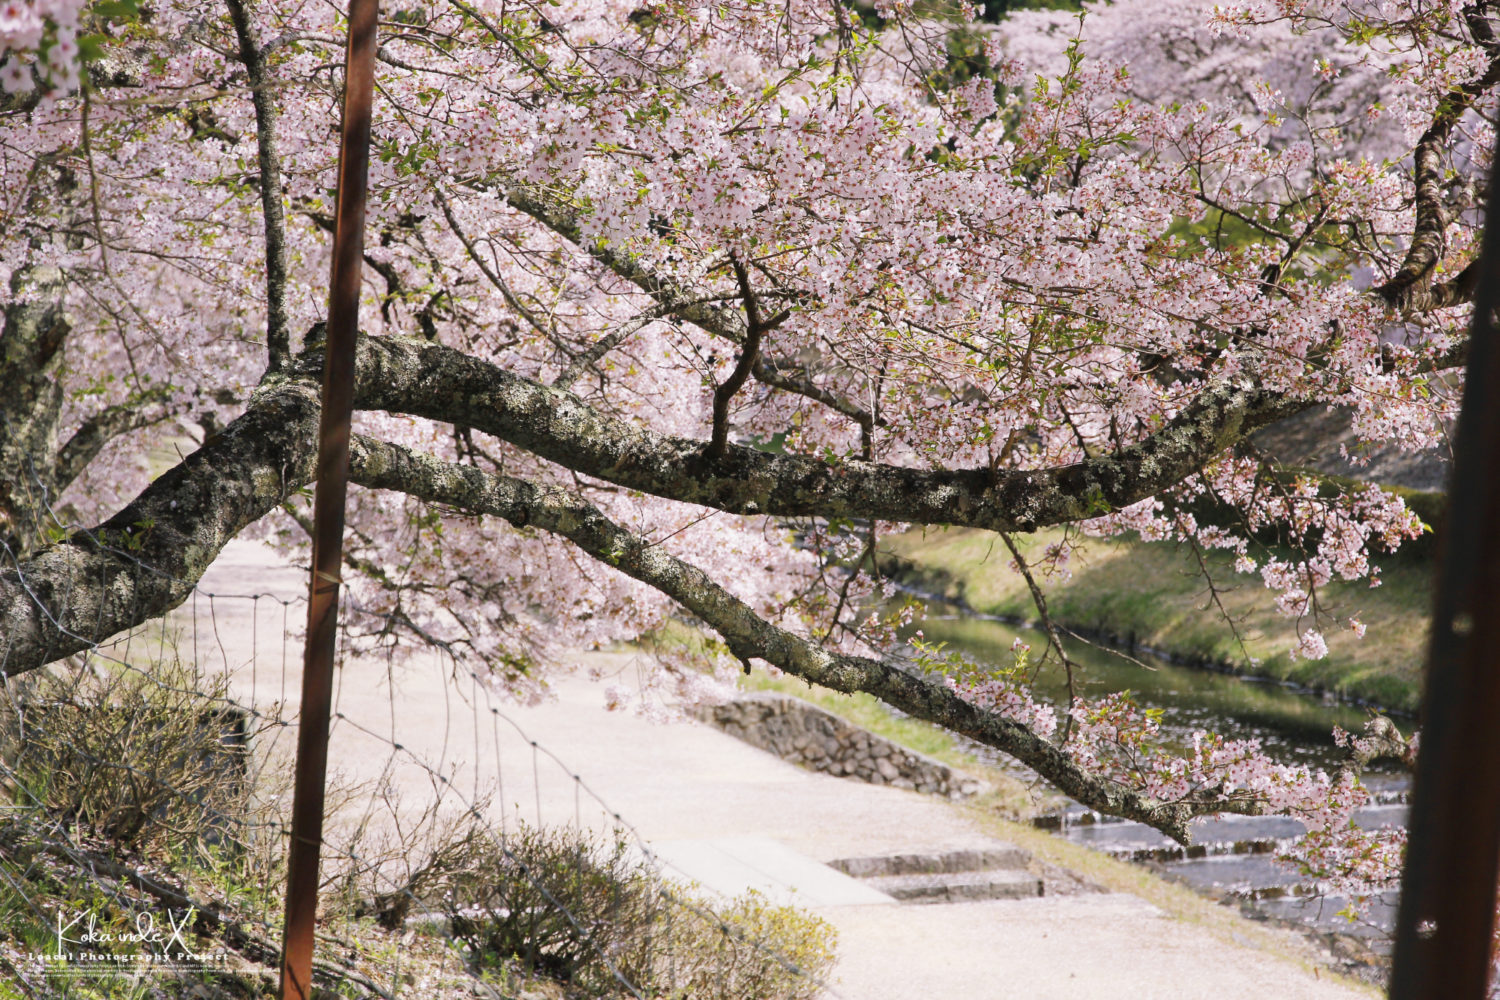 Pictures of River with 1000 cherry blossom trees in Japan.